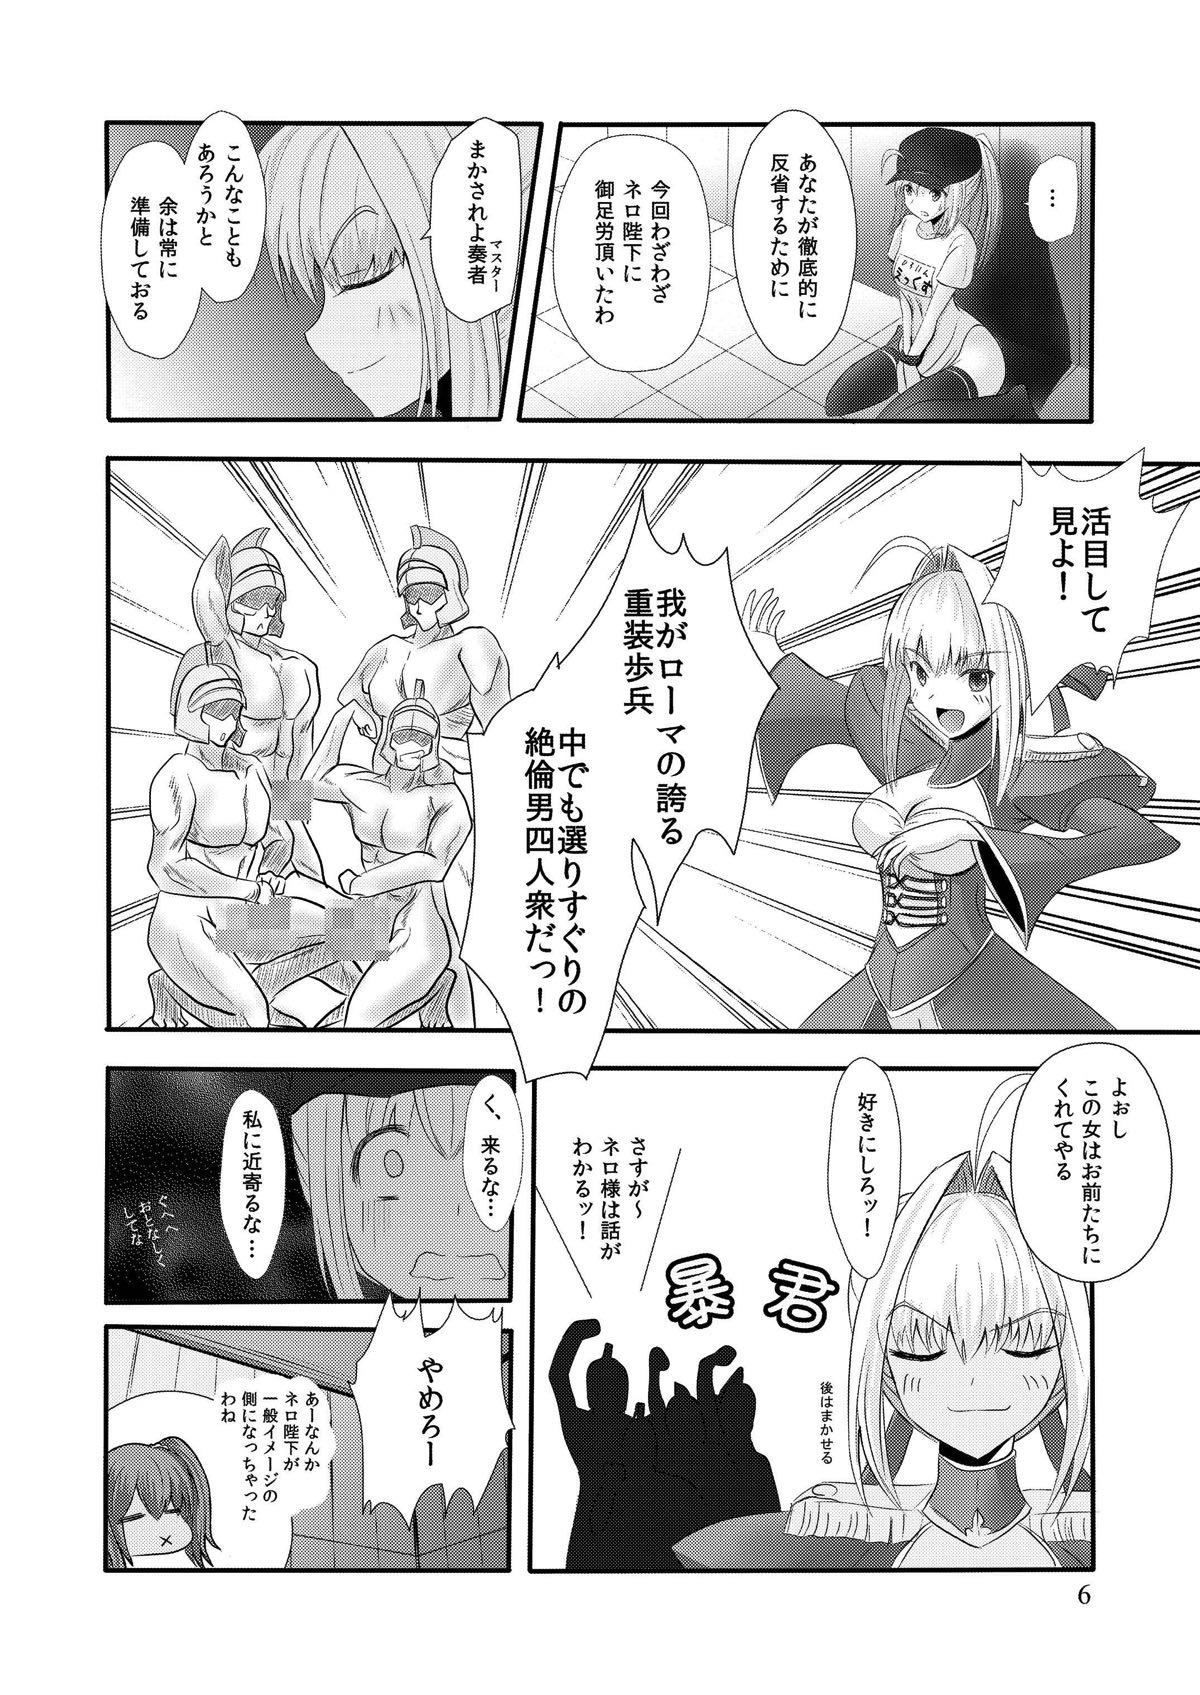 Ladyboy X!-MACHINA - Fate grand order Cougars - Page 7